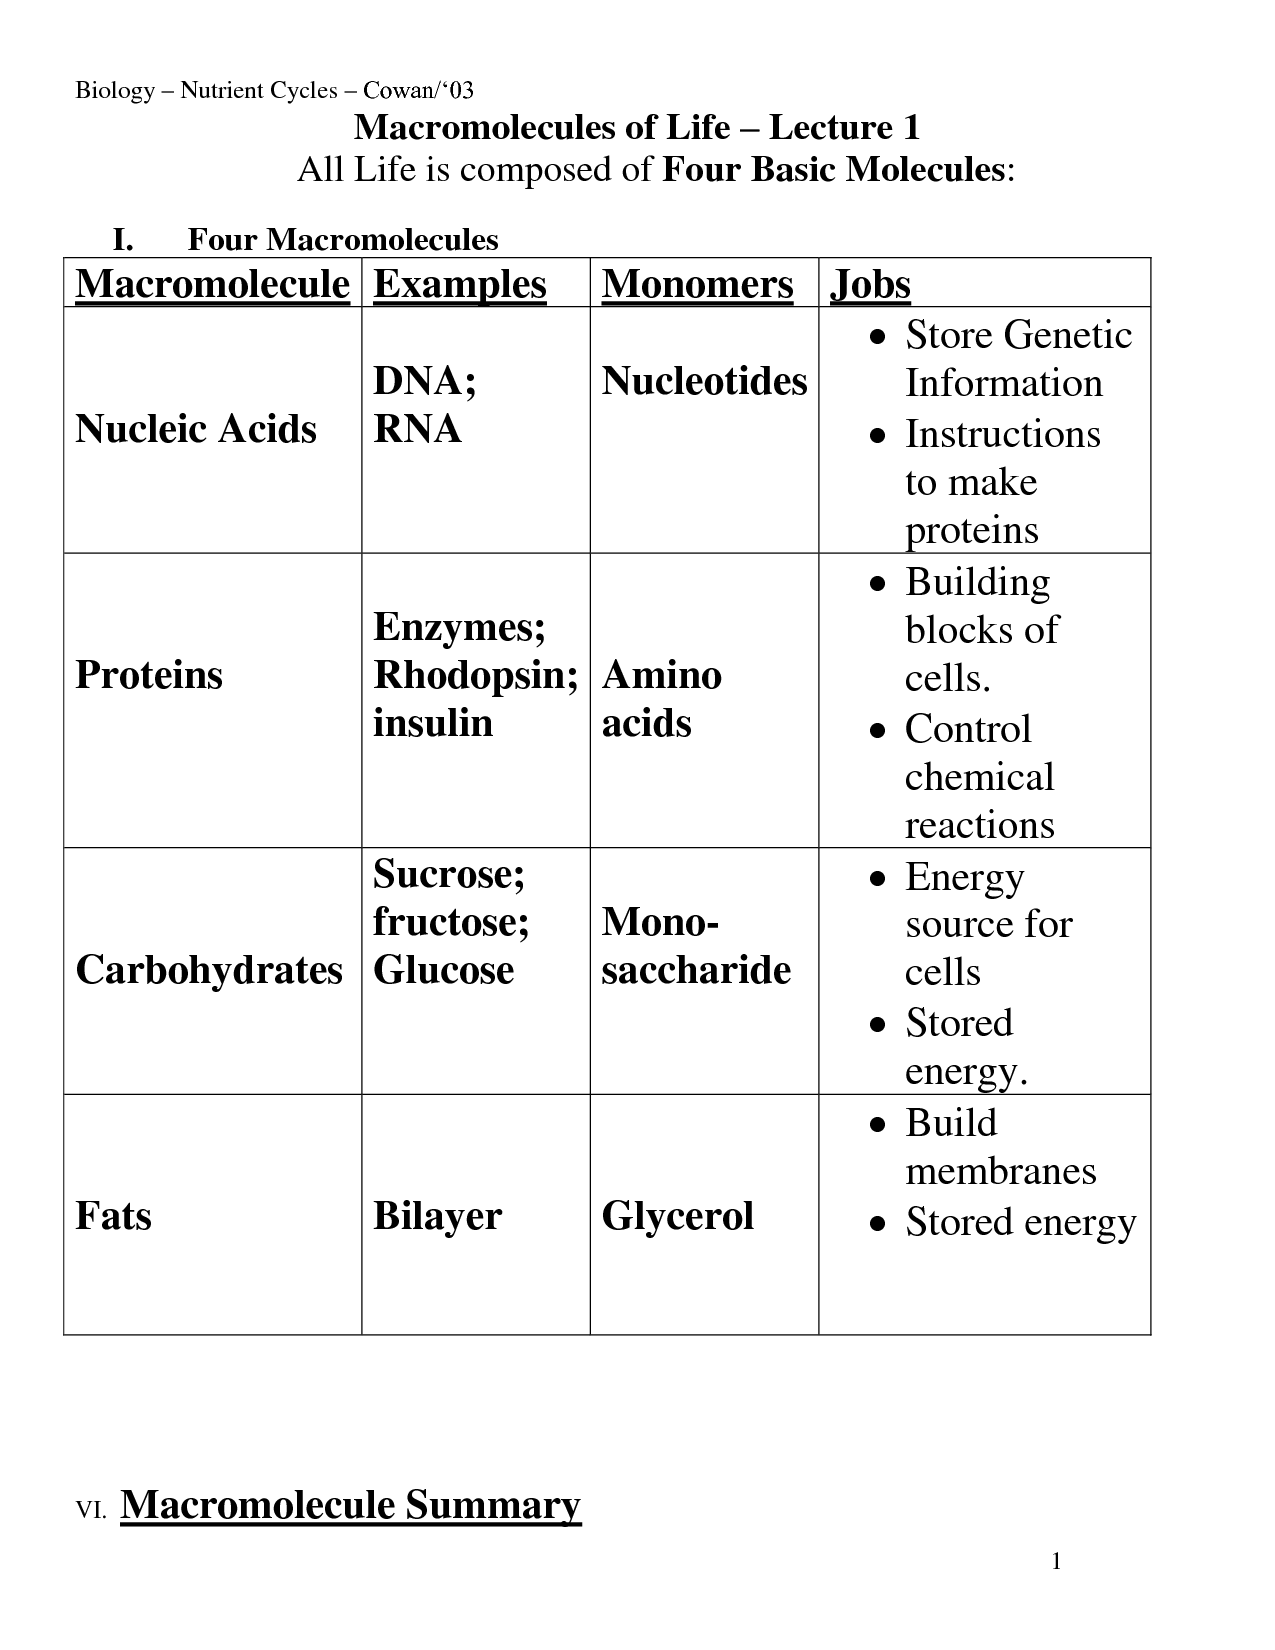 4 Macromolecules and Their Functions Image